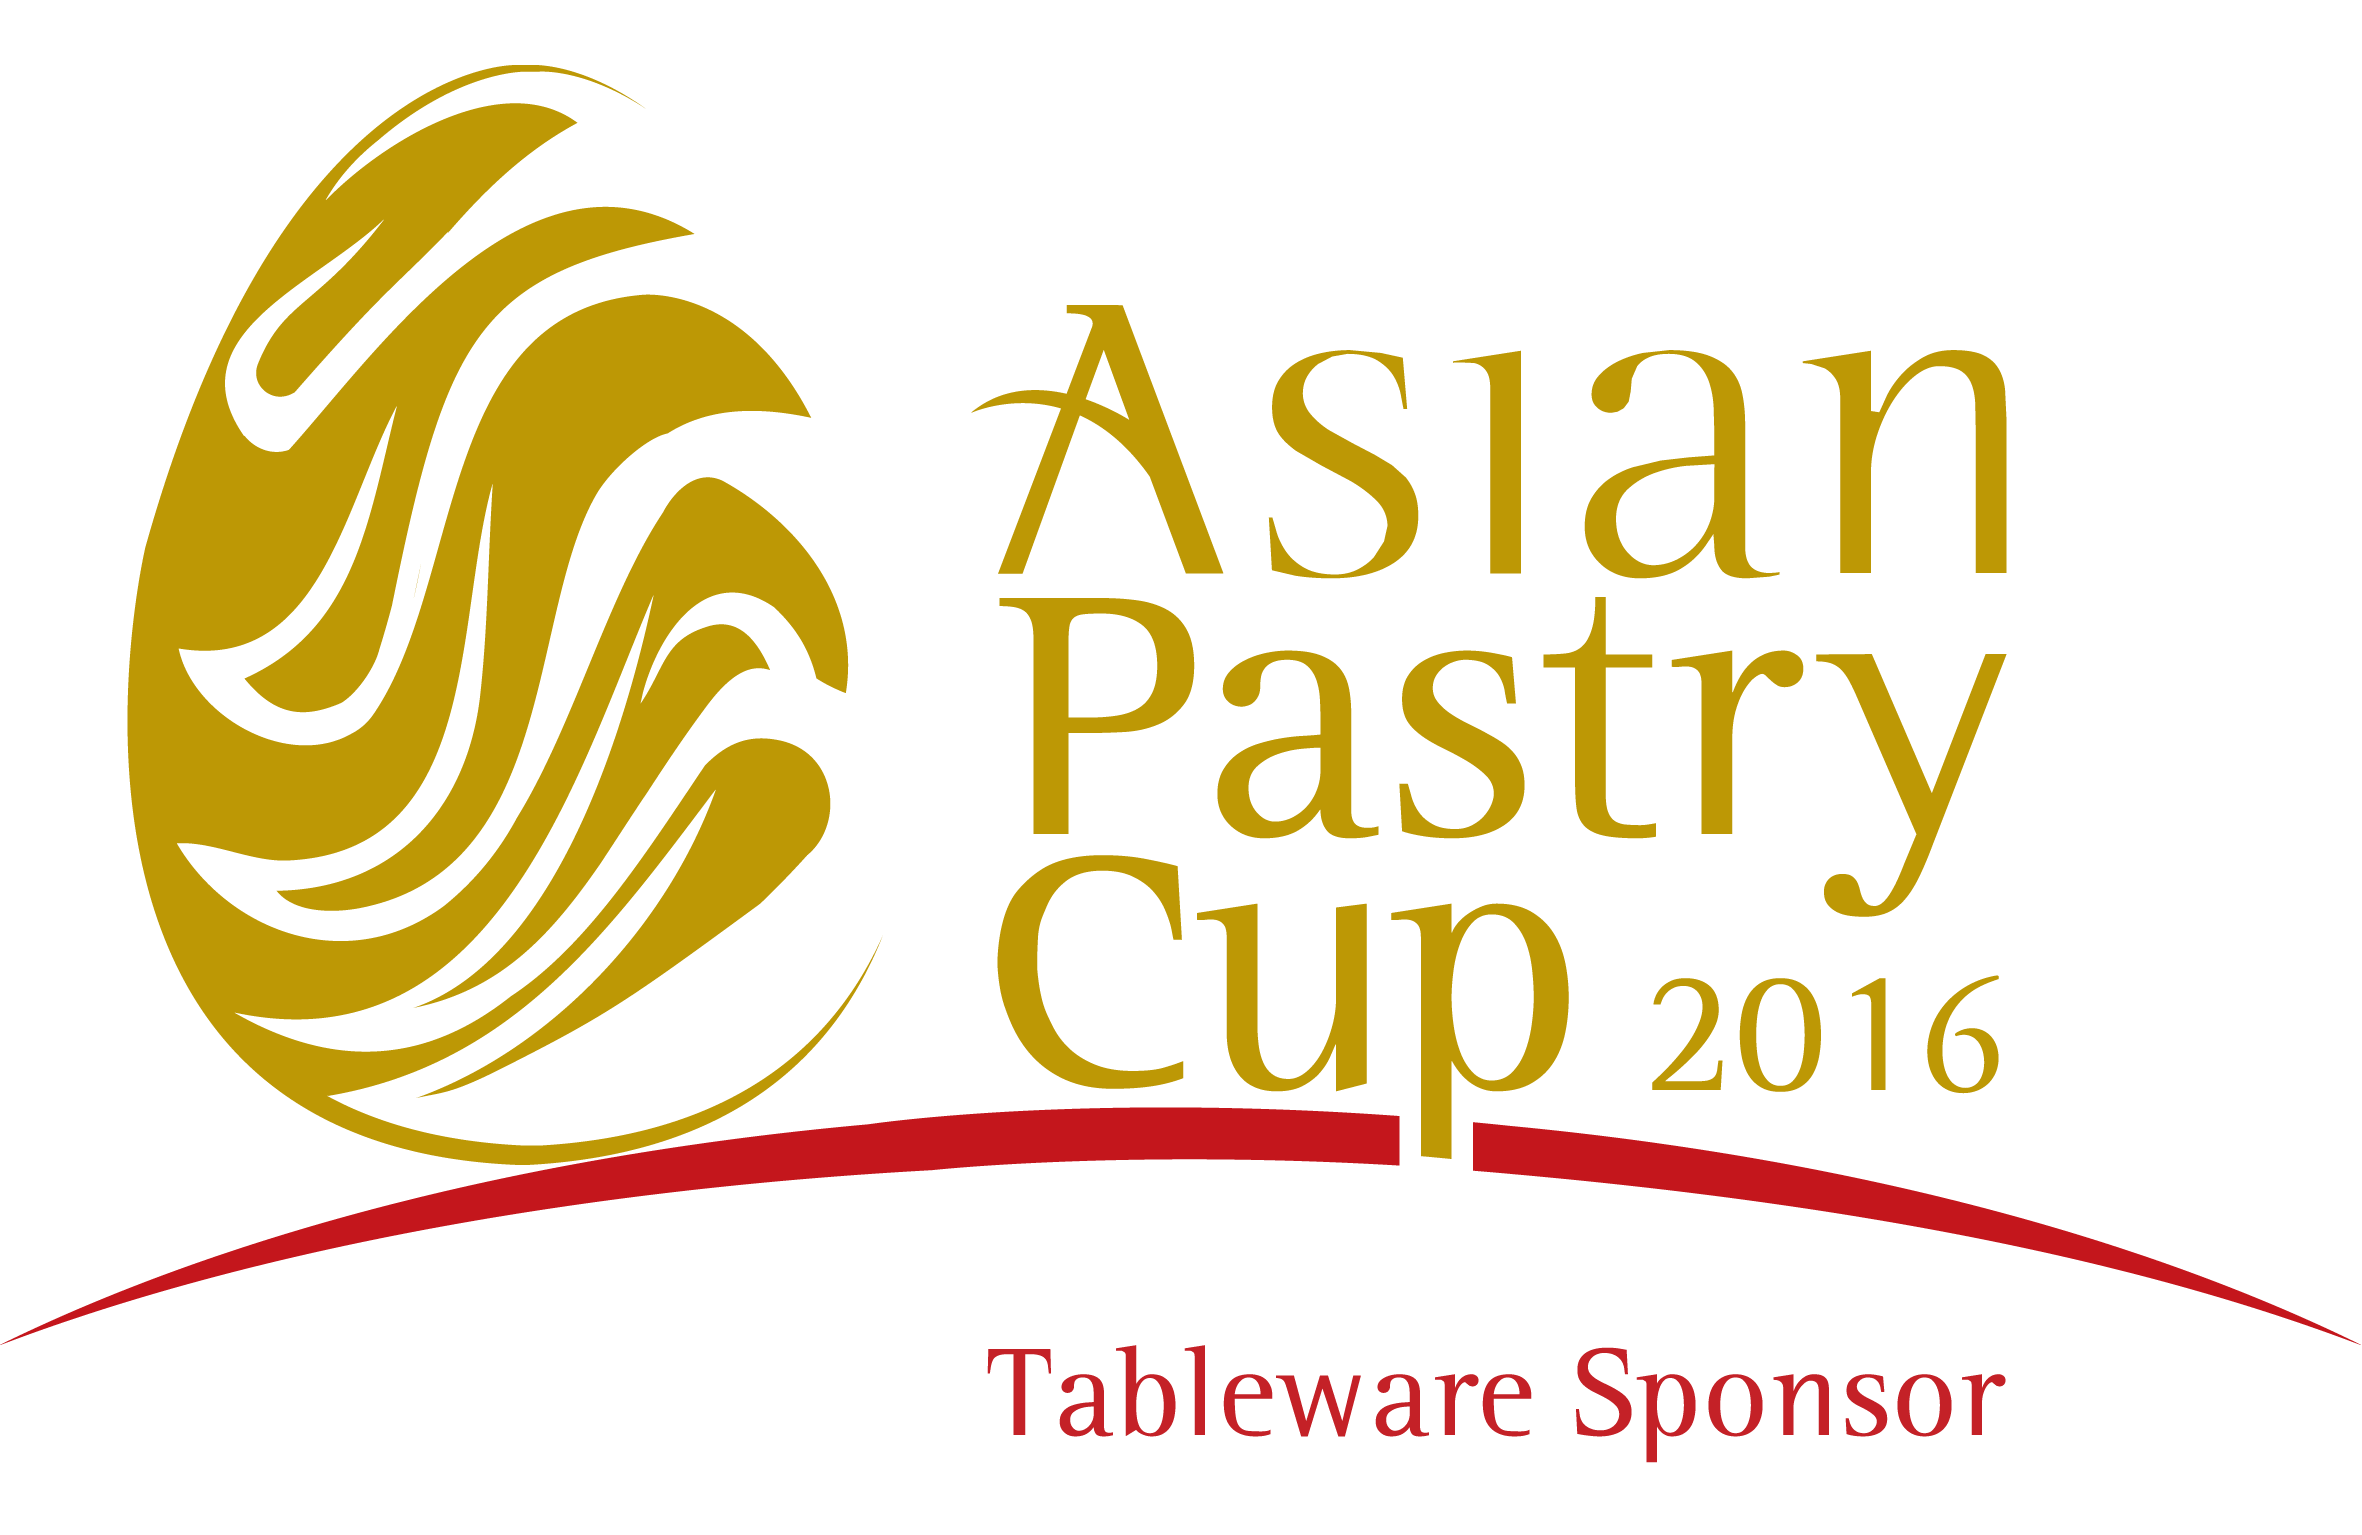 Wrangler reccomend Asian pastry cup